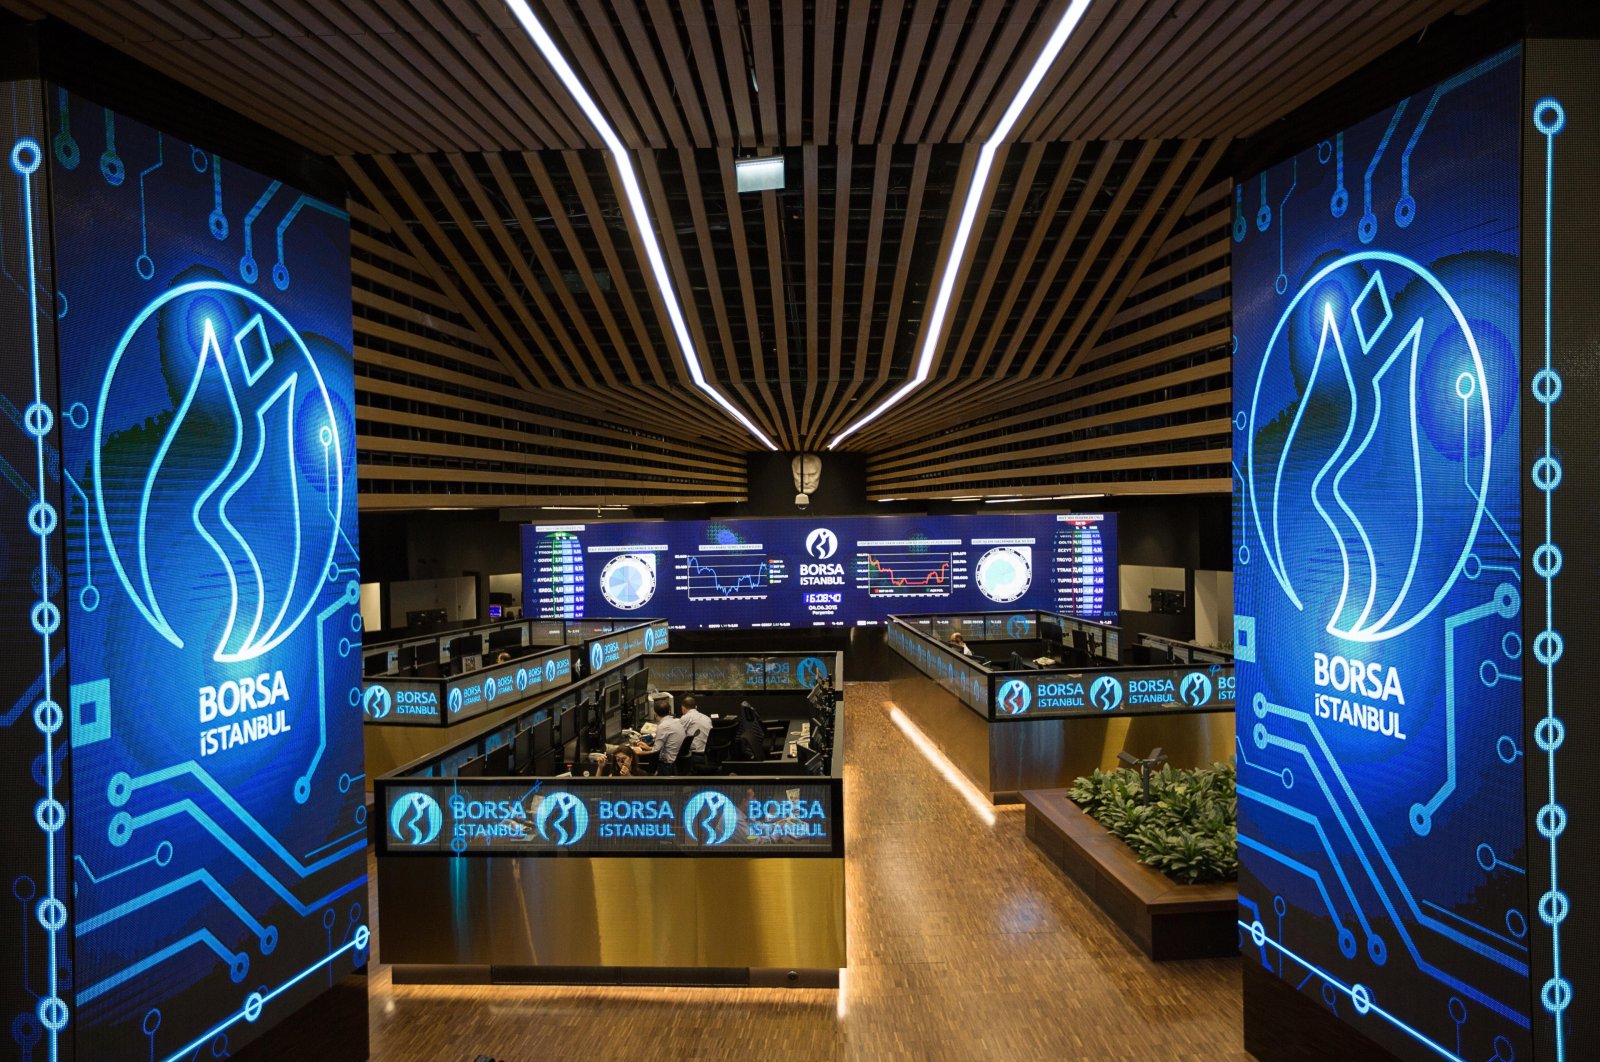 Traders work at their desks on the floor of Borsa Istanbul in Istanbul, Turkey, June 4, 2020. (IHA Photo)